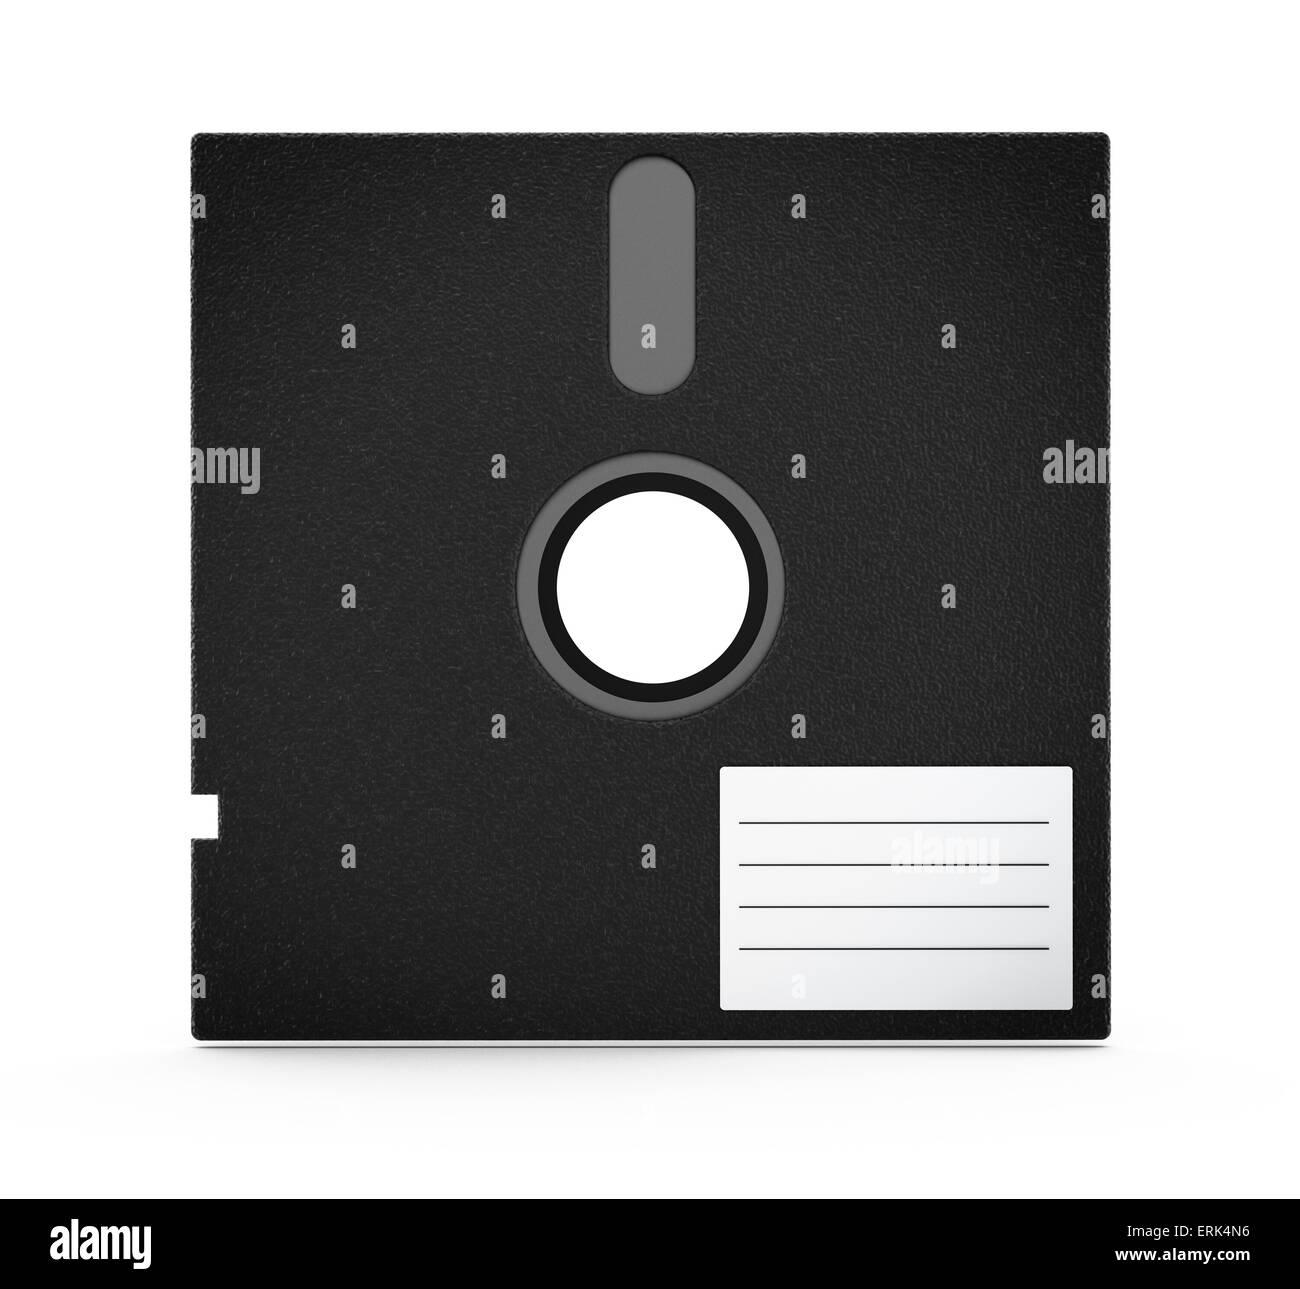 5 inch floppy disk isolated on white background. Stock Photo